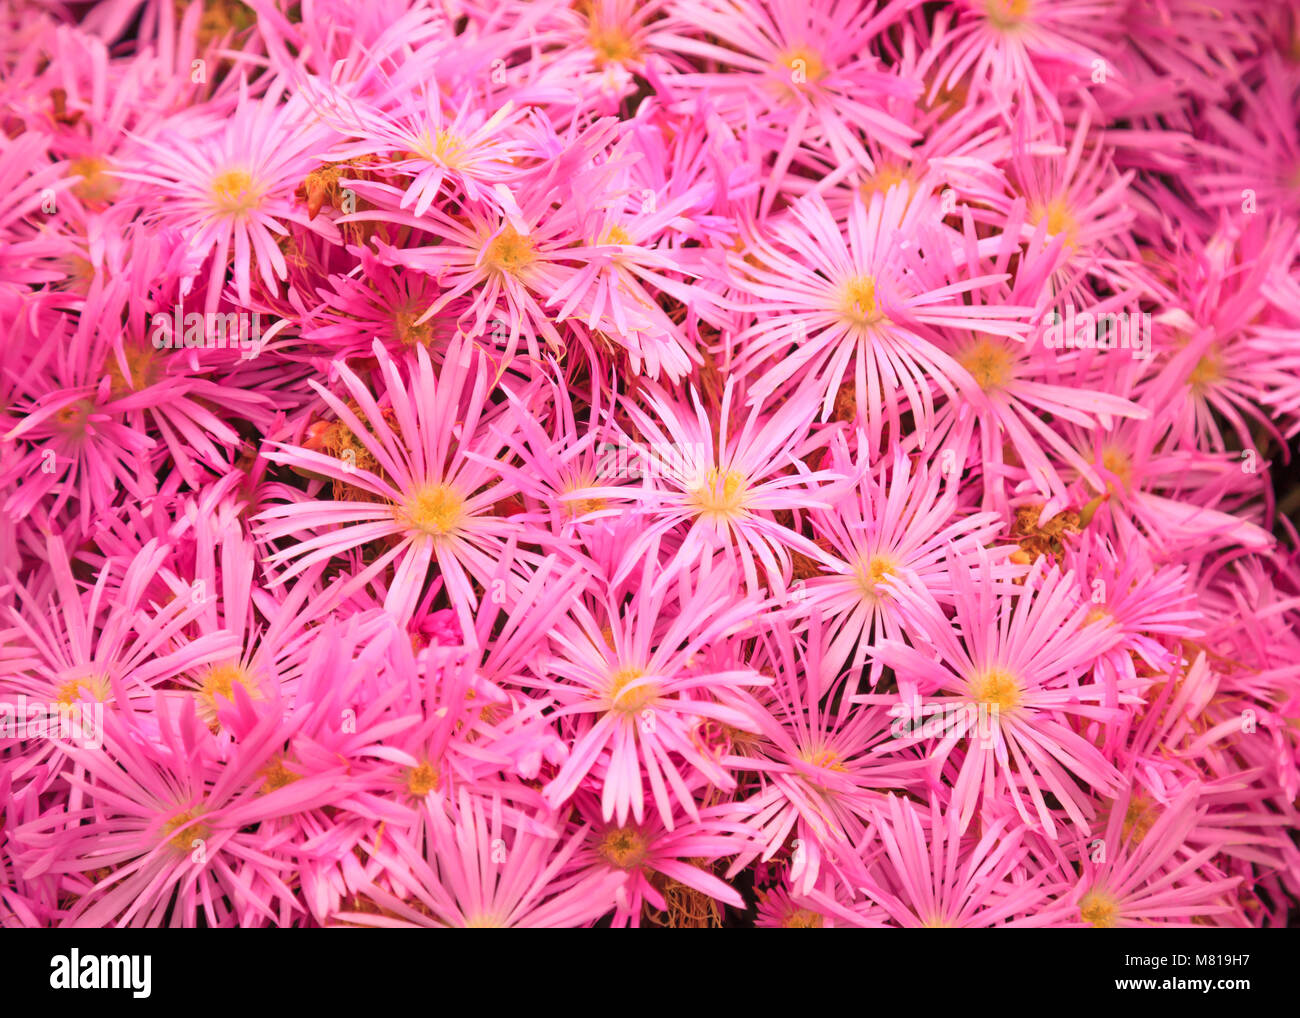 Flowering Plant in Aizoaceae Family: Pink Livingstone Daisies or Buck Bay vygies, Ice Plant or carpet weed, and Ruschieaes Flowers. Colorful Blossomin Stock Photo